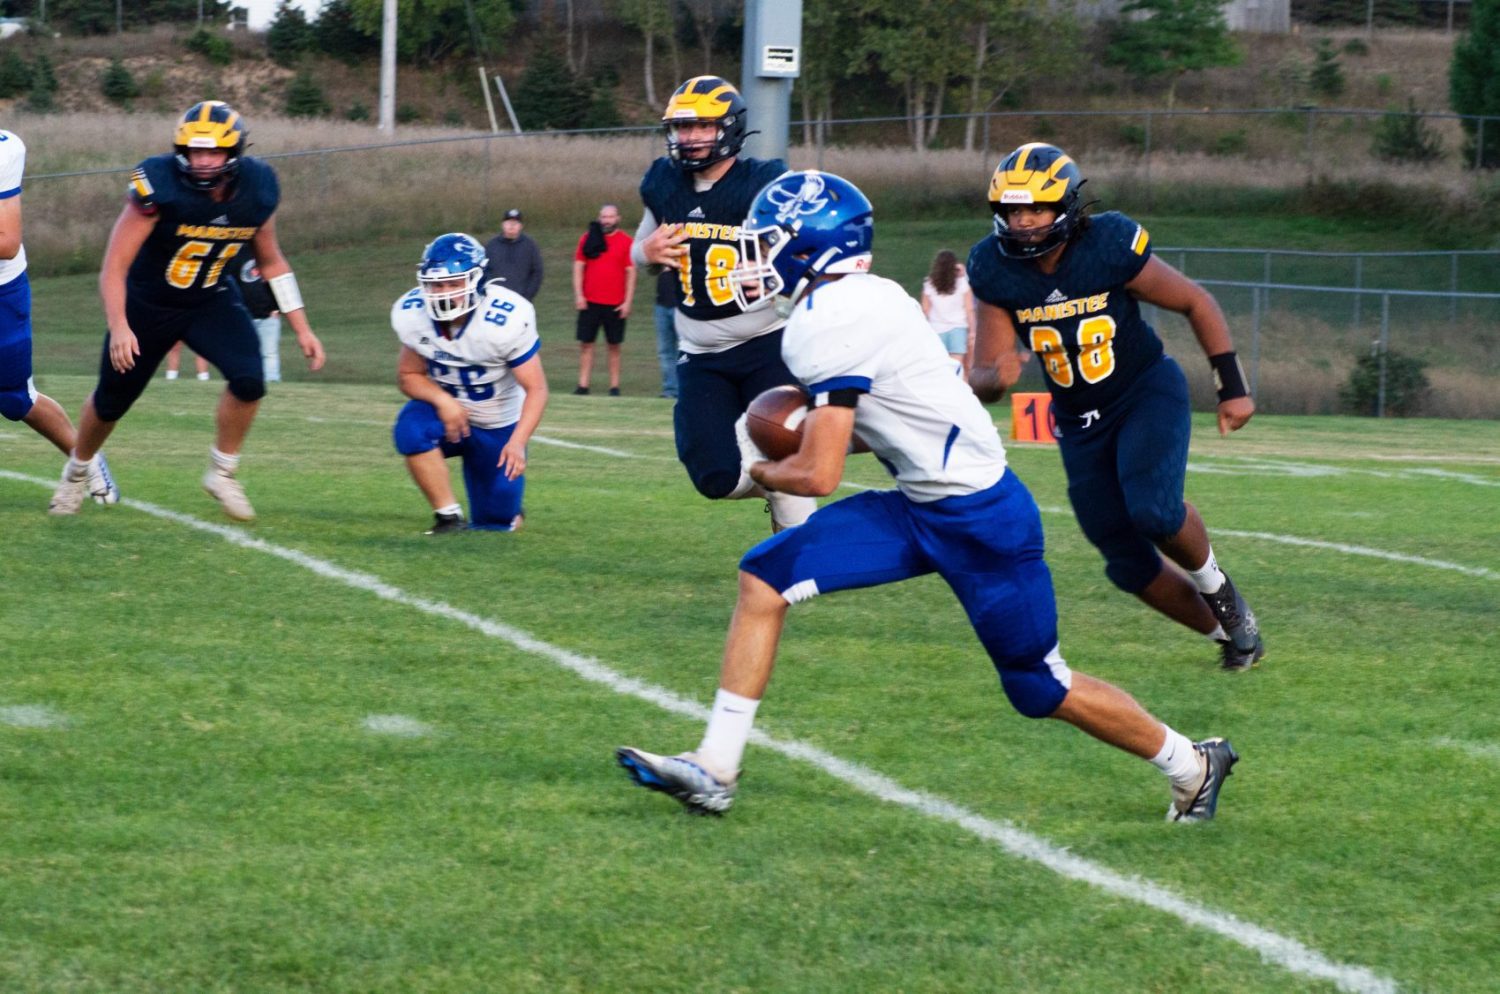 Jones scores two touchdowns, rushes for nearly 200 yards as Oakridge crushes Manistee 46-19